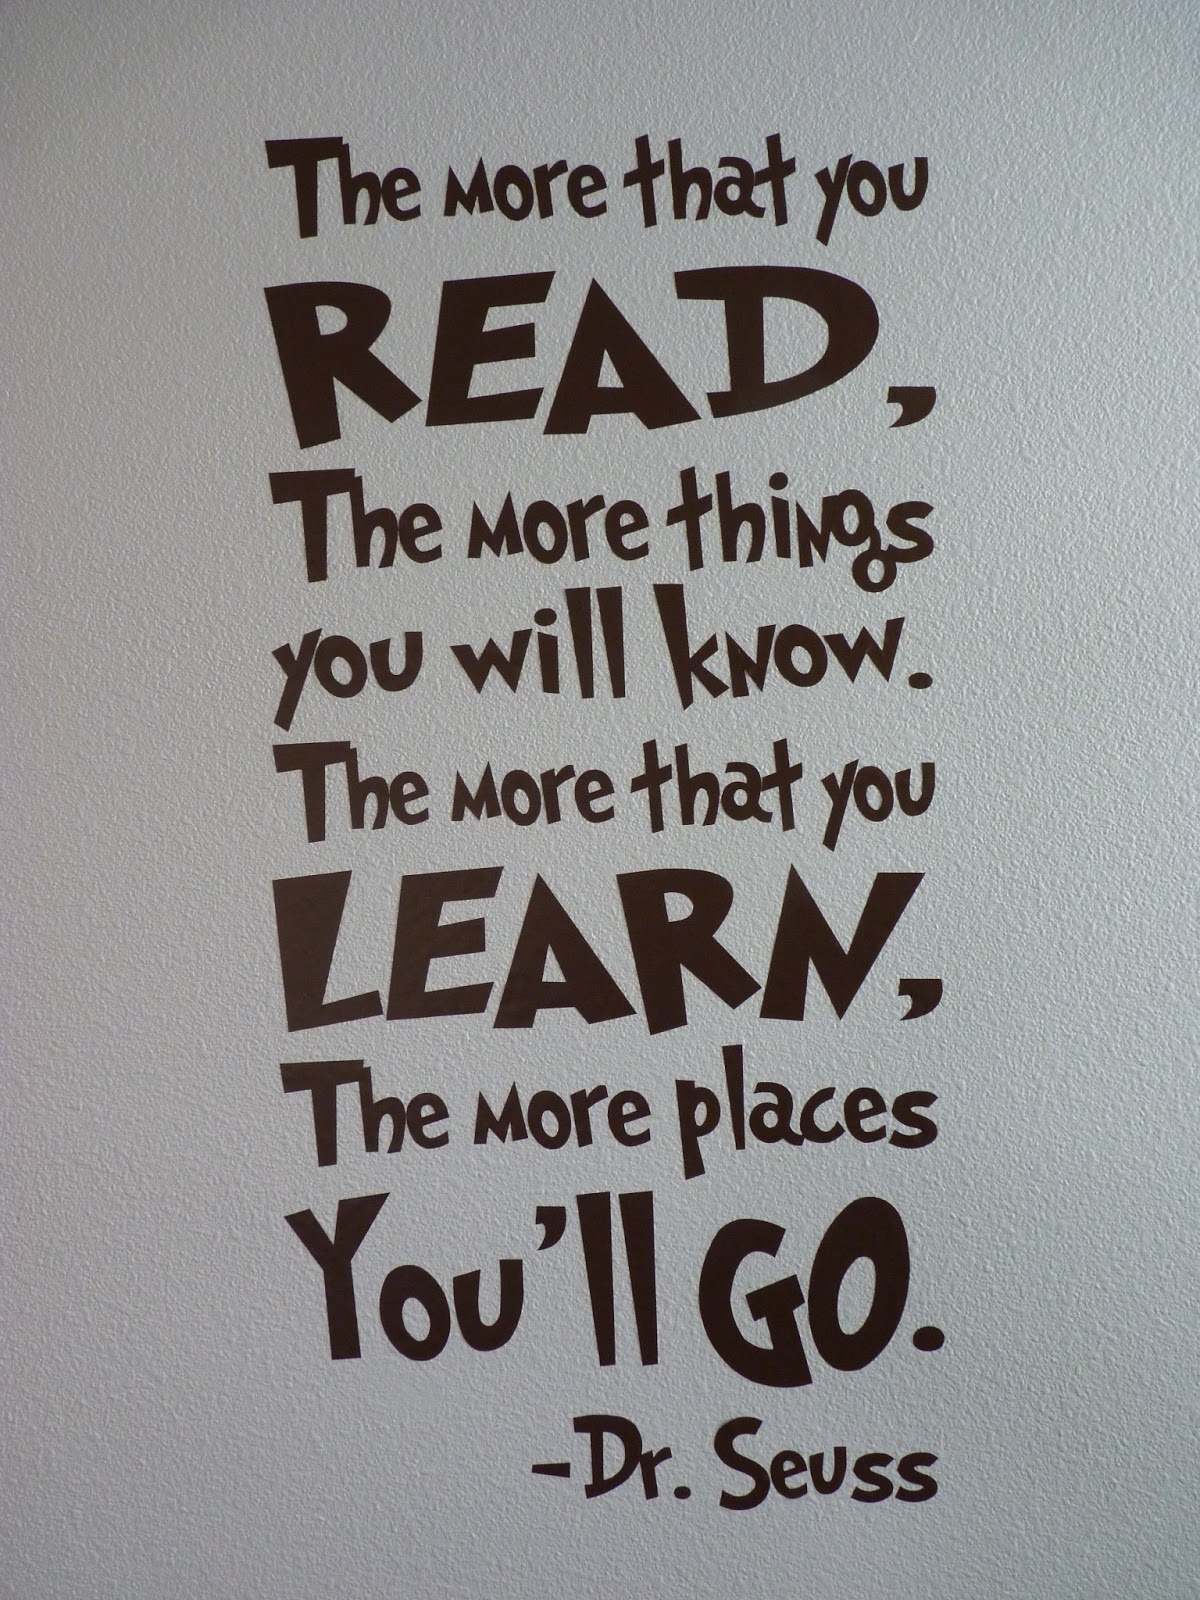 Great Quotes For Reading What Are Some Great Quotes On Reading 